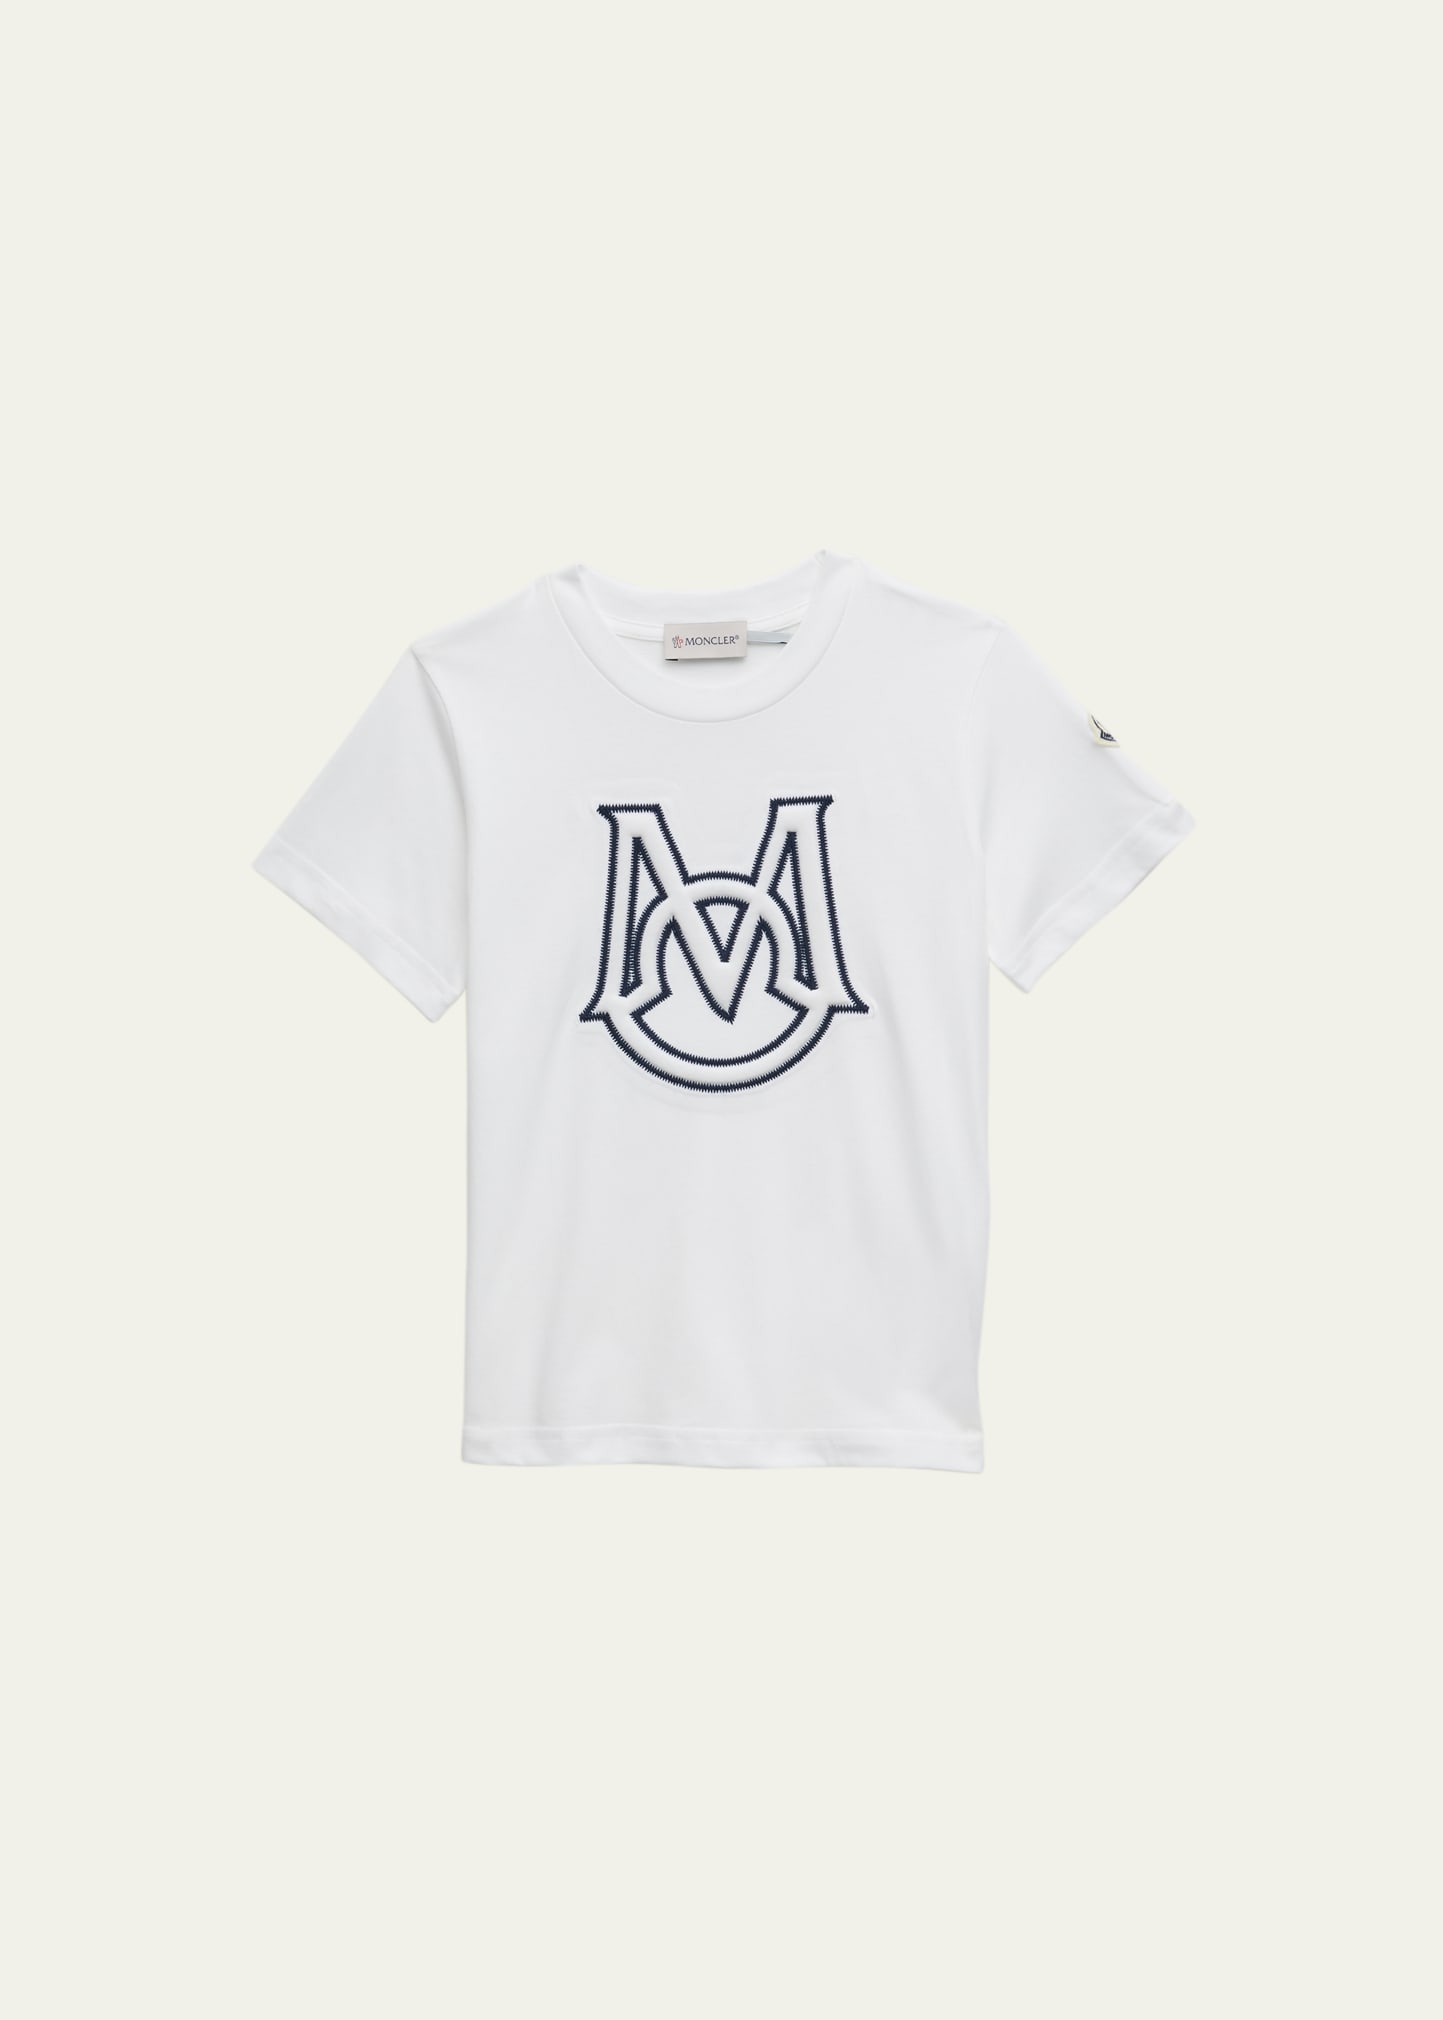 Moncler Kids' Boy's Embroidered Monogram T-shirt In White